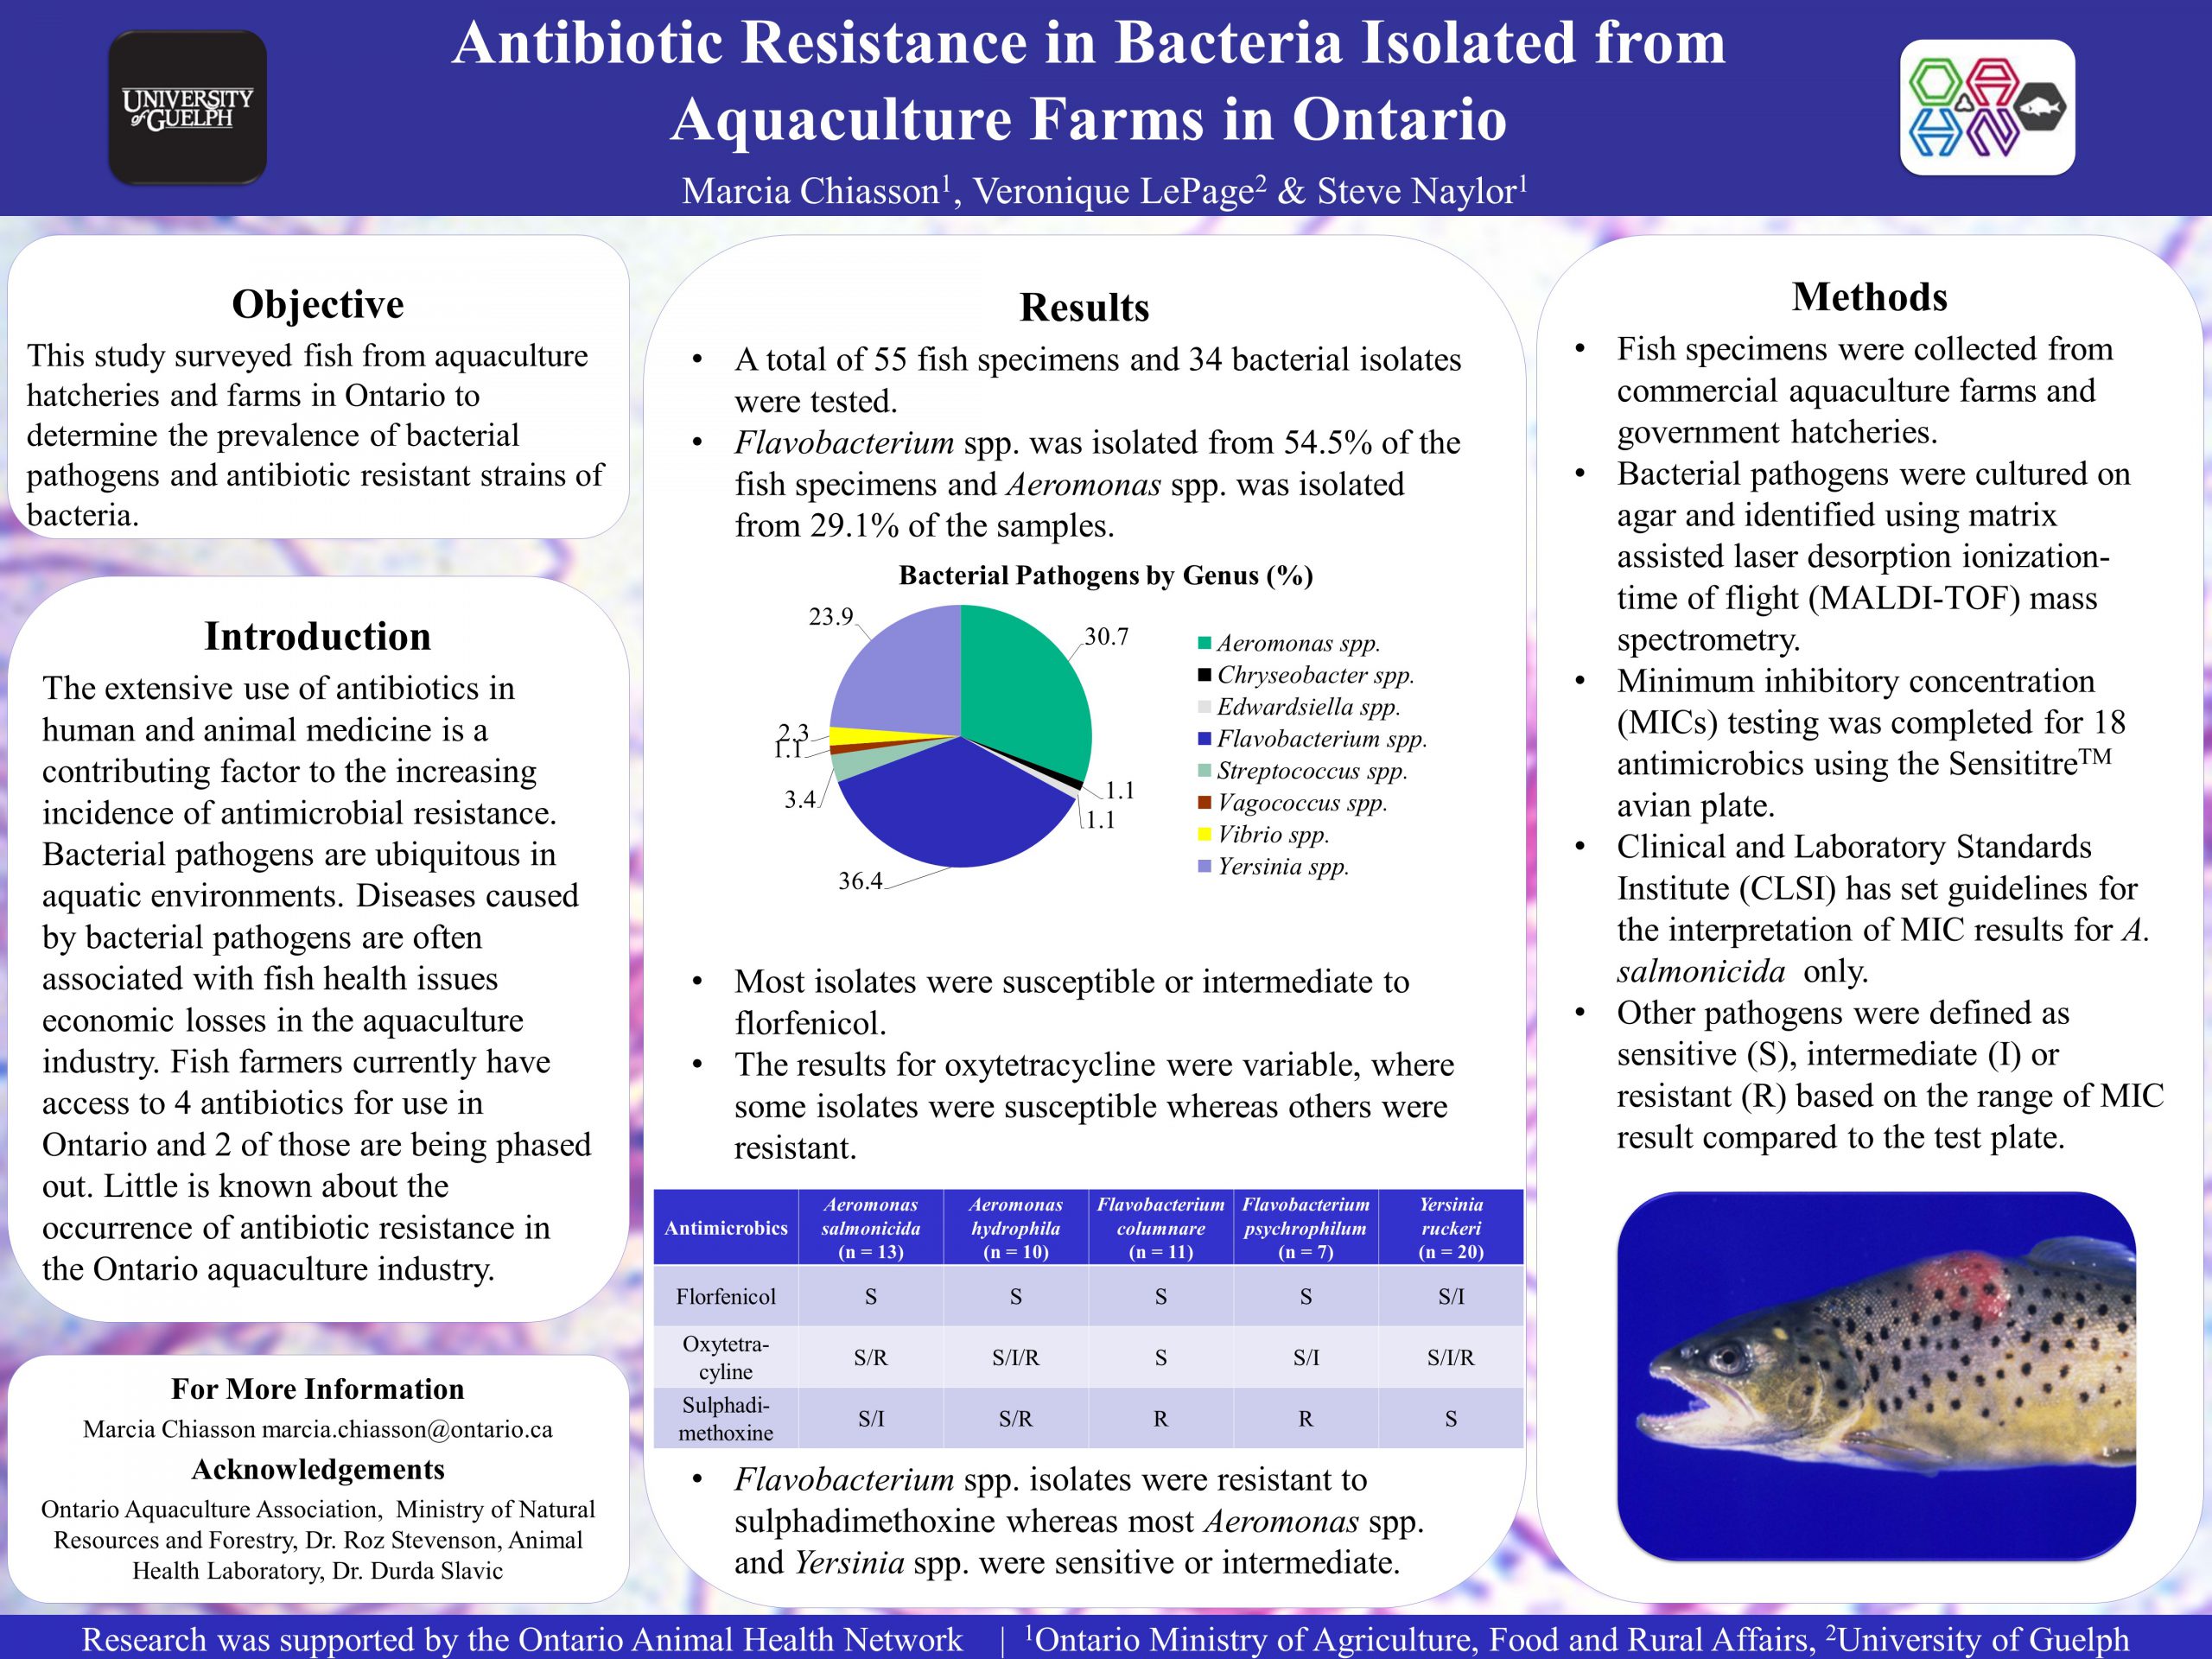 Fish poster for research project on Antibiotic resistance in Ontario aquaculture